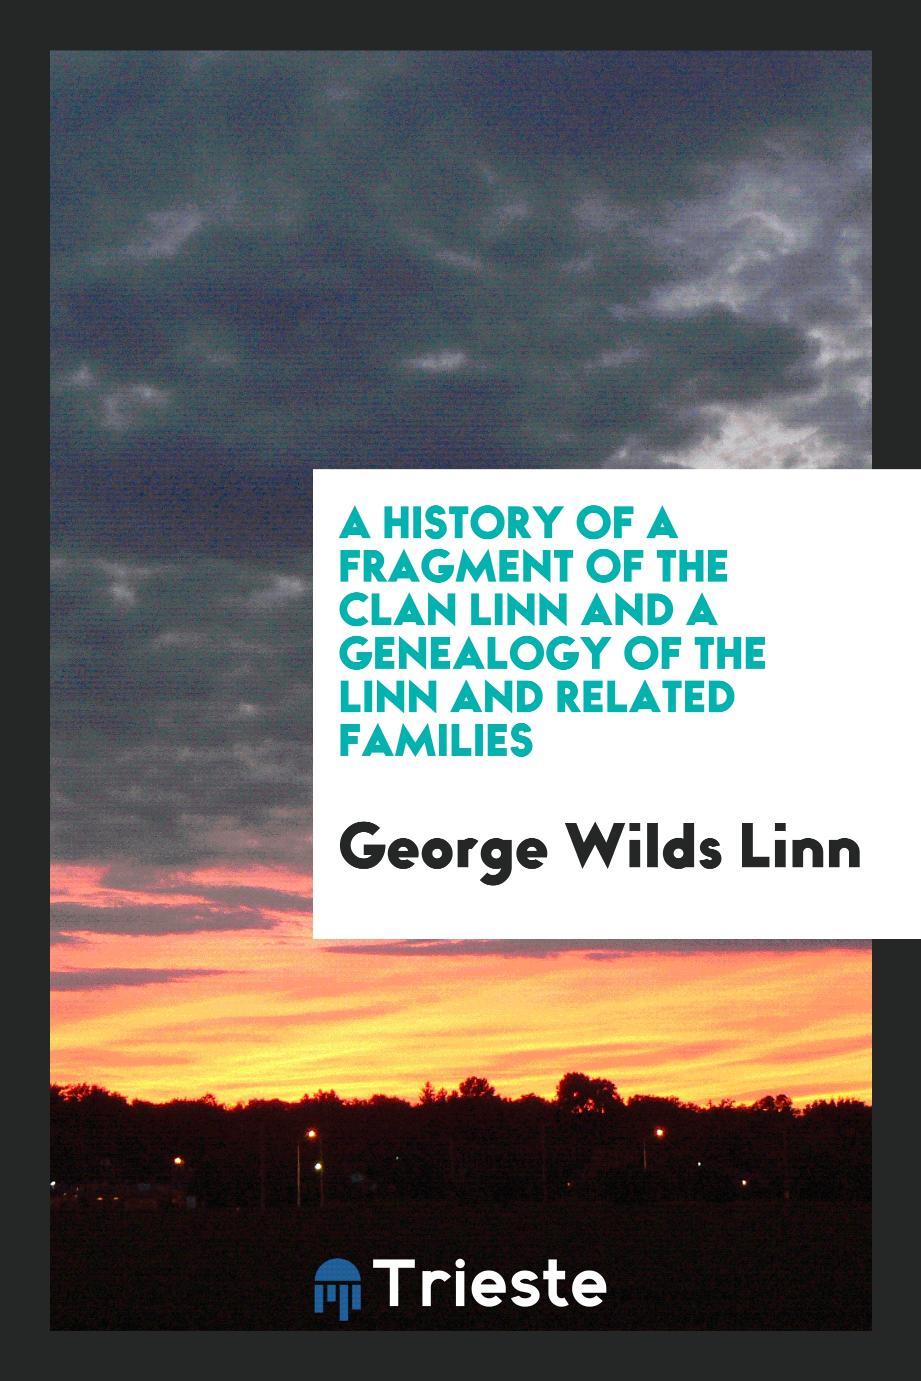 A history of a fragment of the clan Linn and a genealogy of the Linn and related families